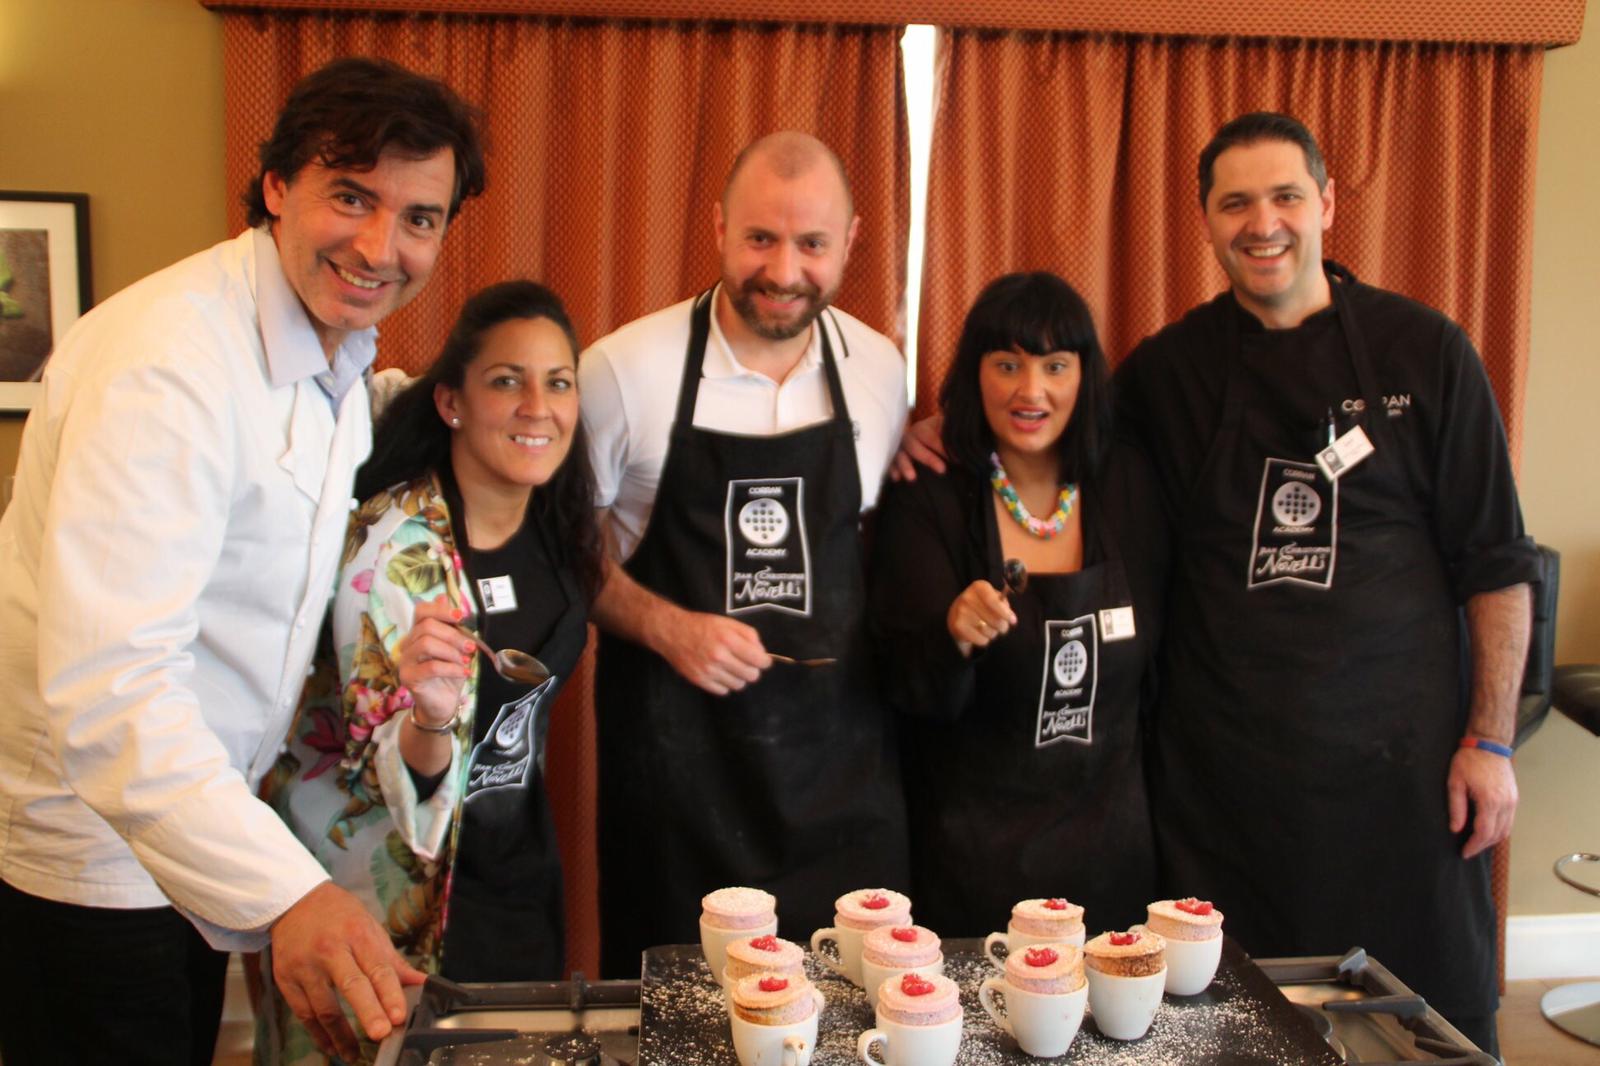 Soufle making with Jean Christophe Novelli at The Corran Resort